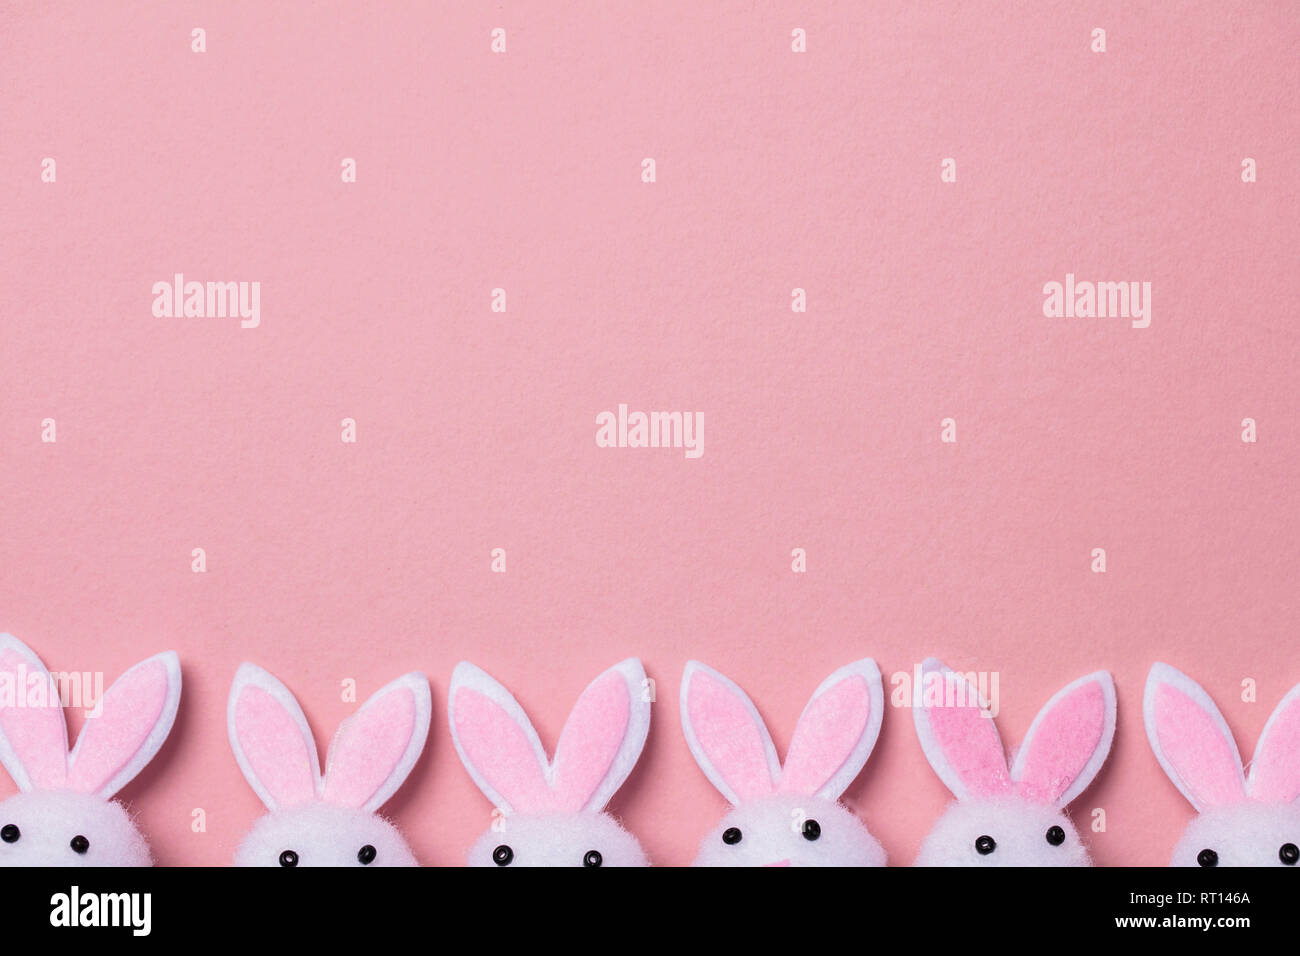 Bunny rabbit ears on a pastel pink background Stock Photo